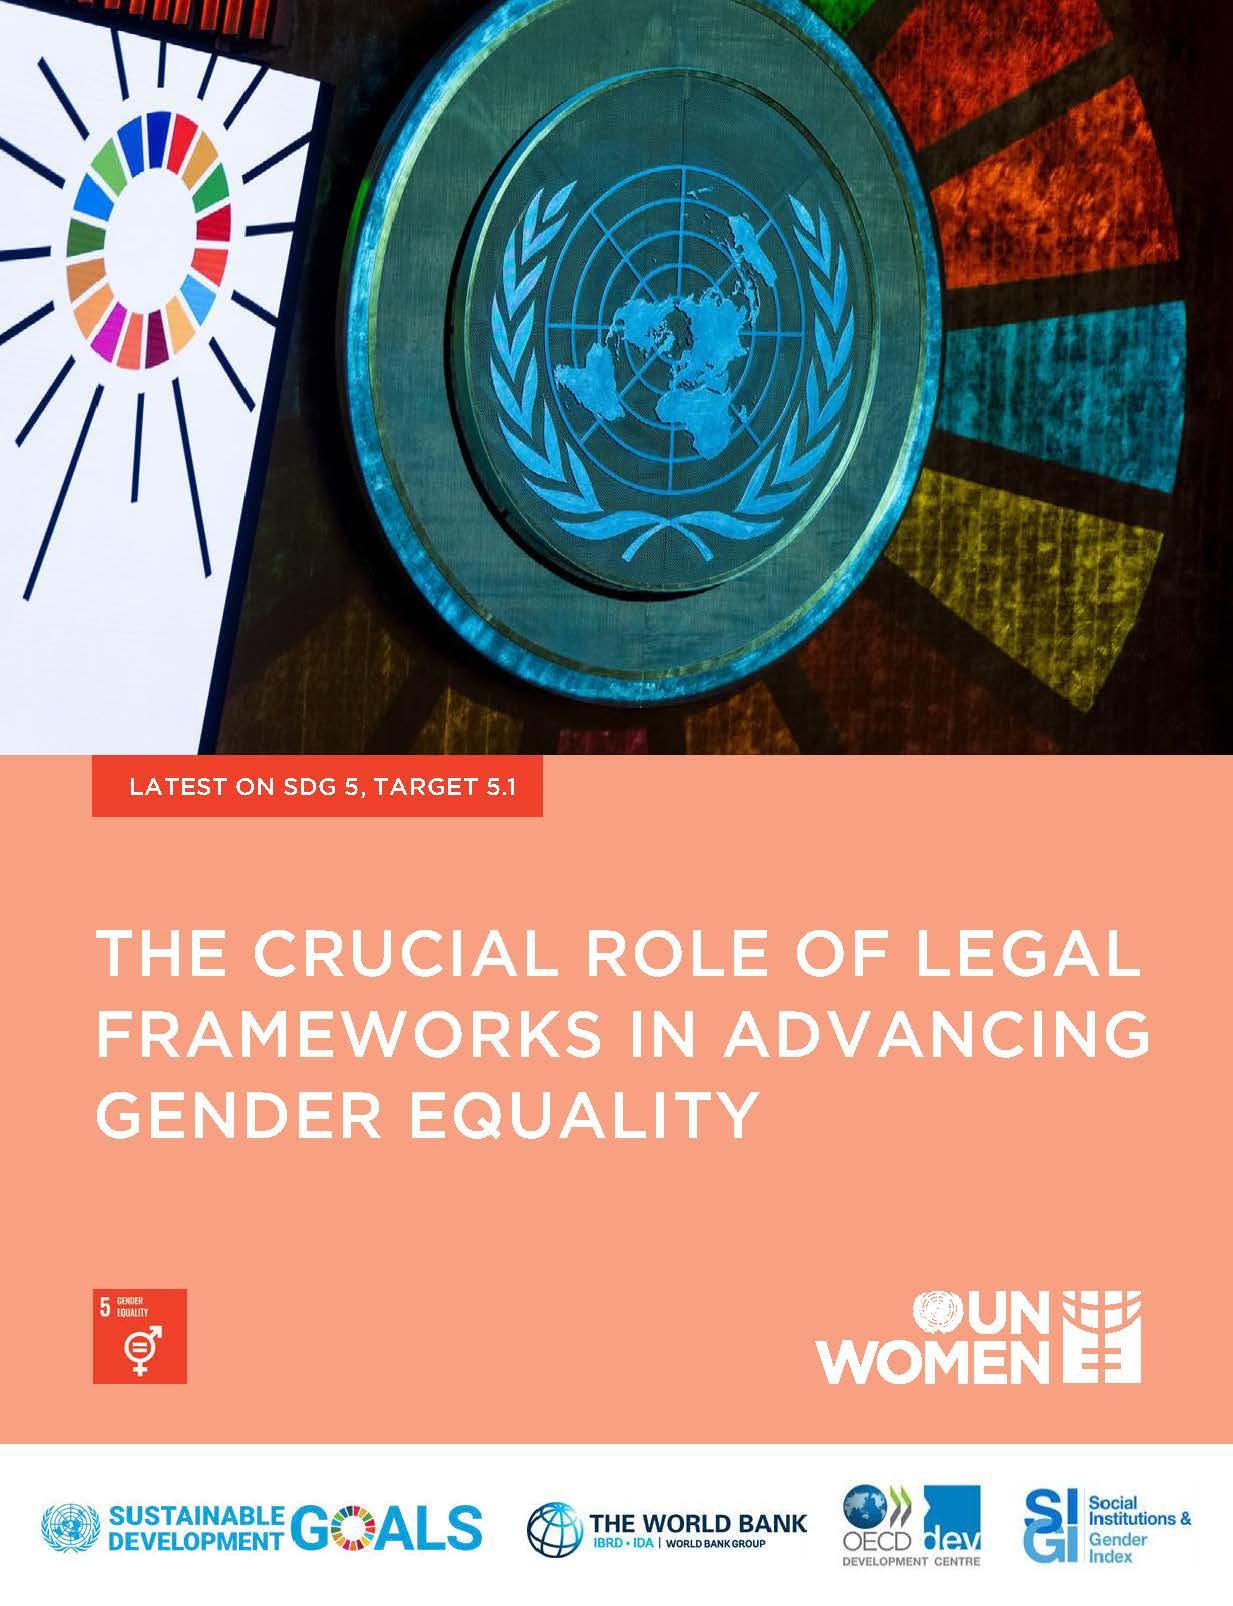 The crucial role of legal frameworks in advancing gender equality